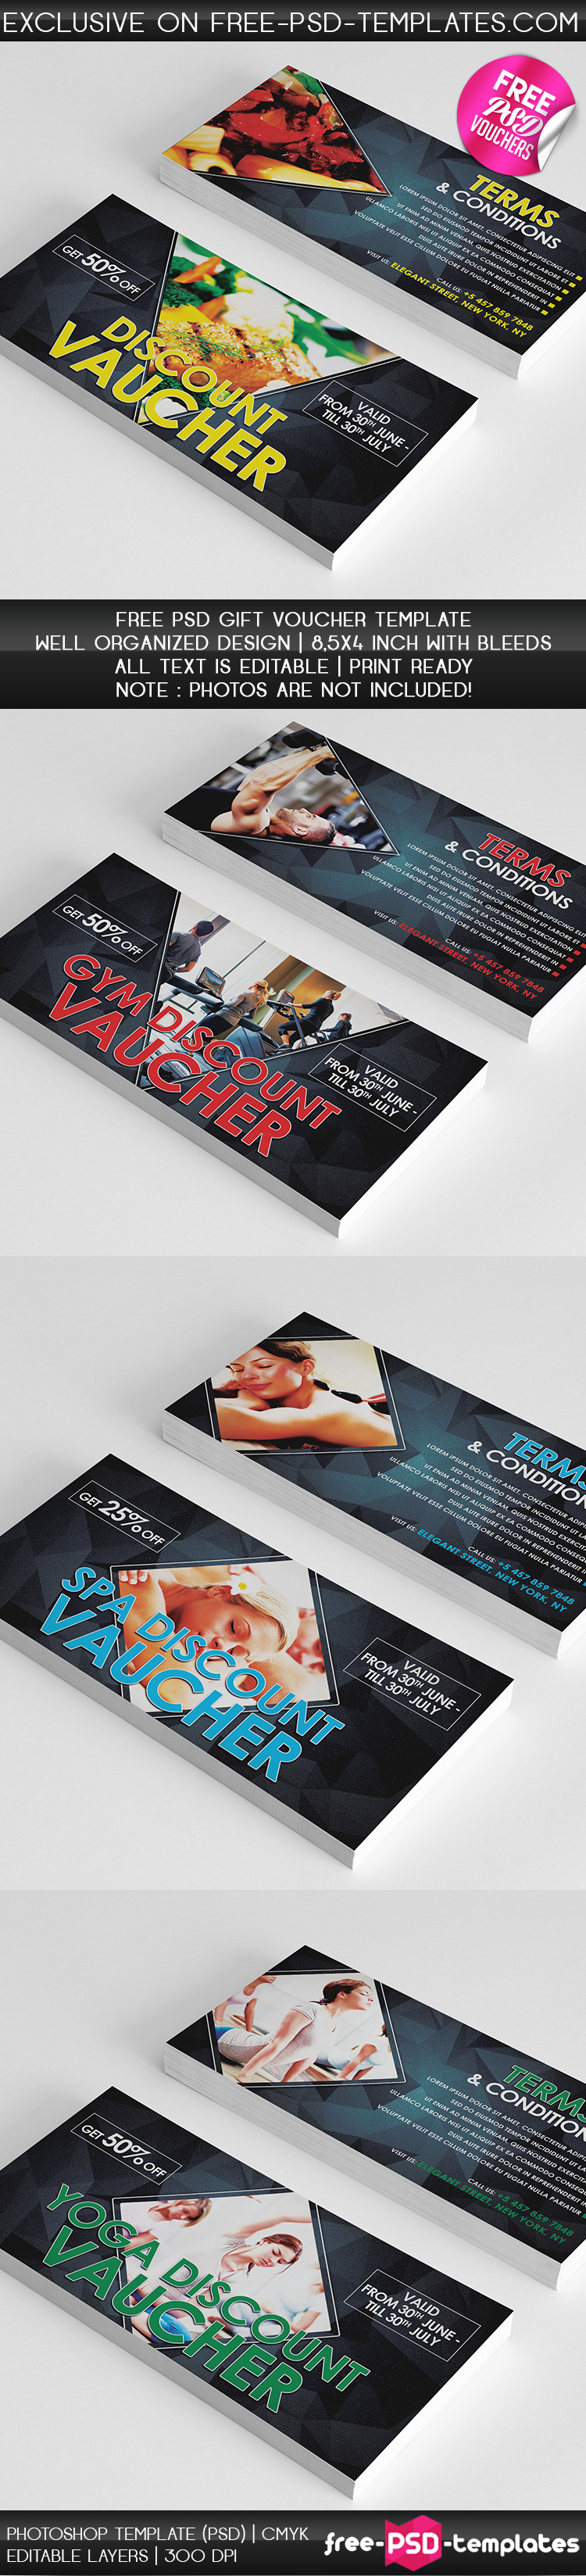 Preview_Free_PSD_Gift_Voucher